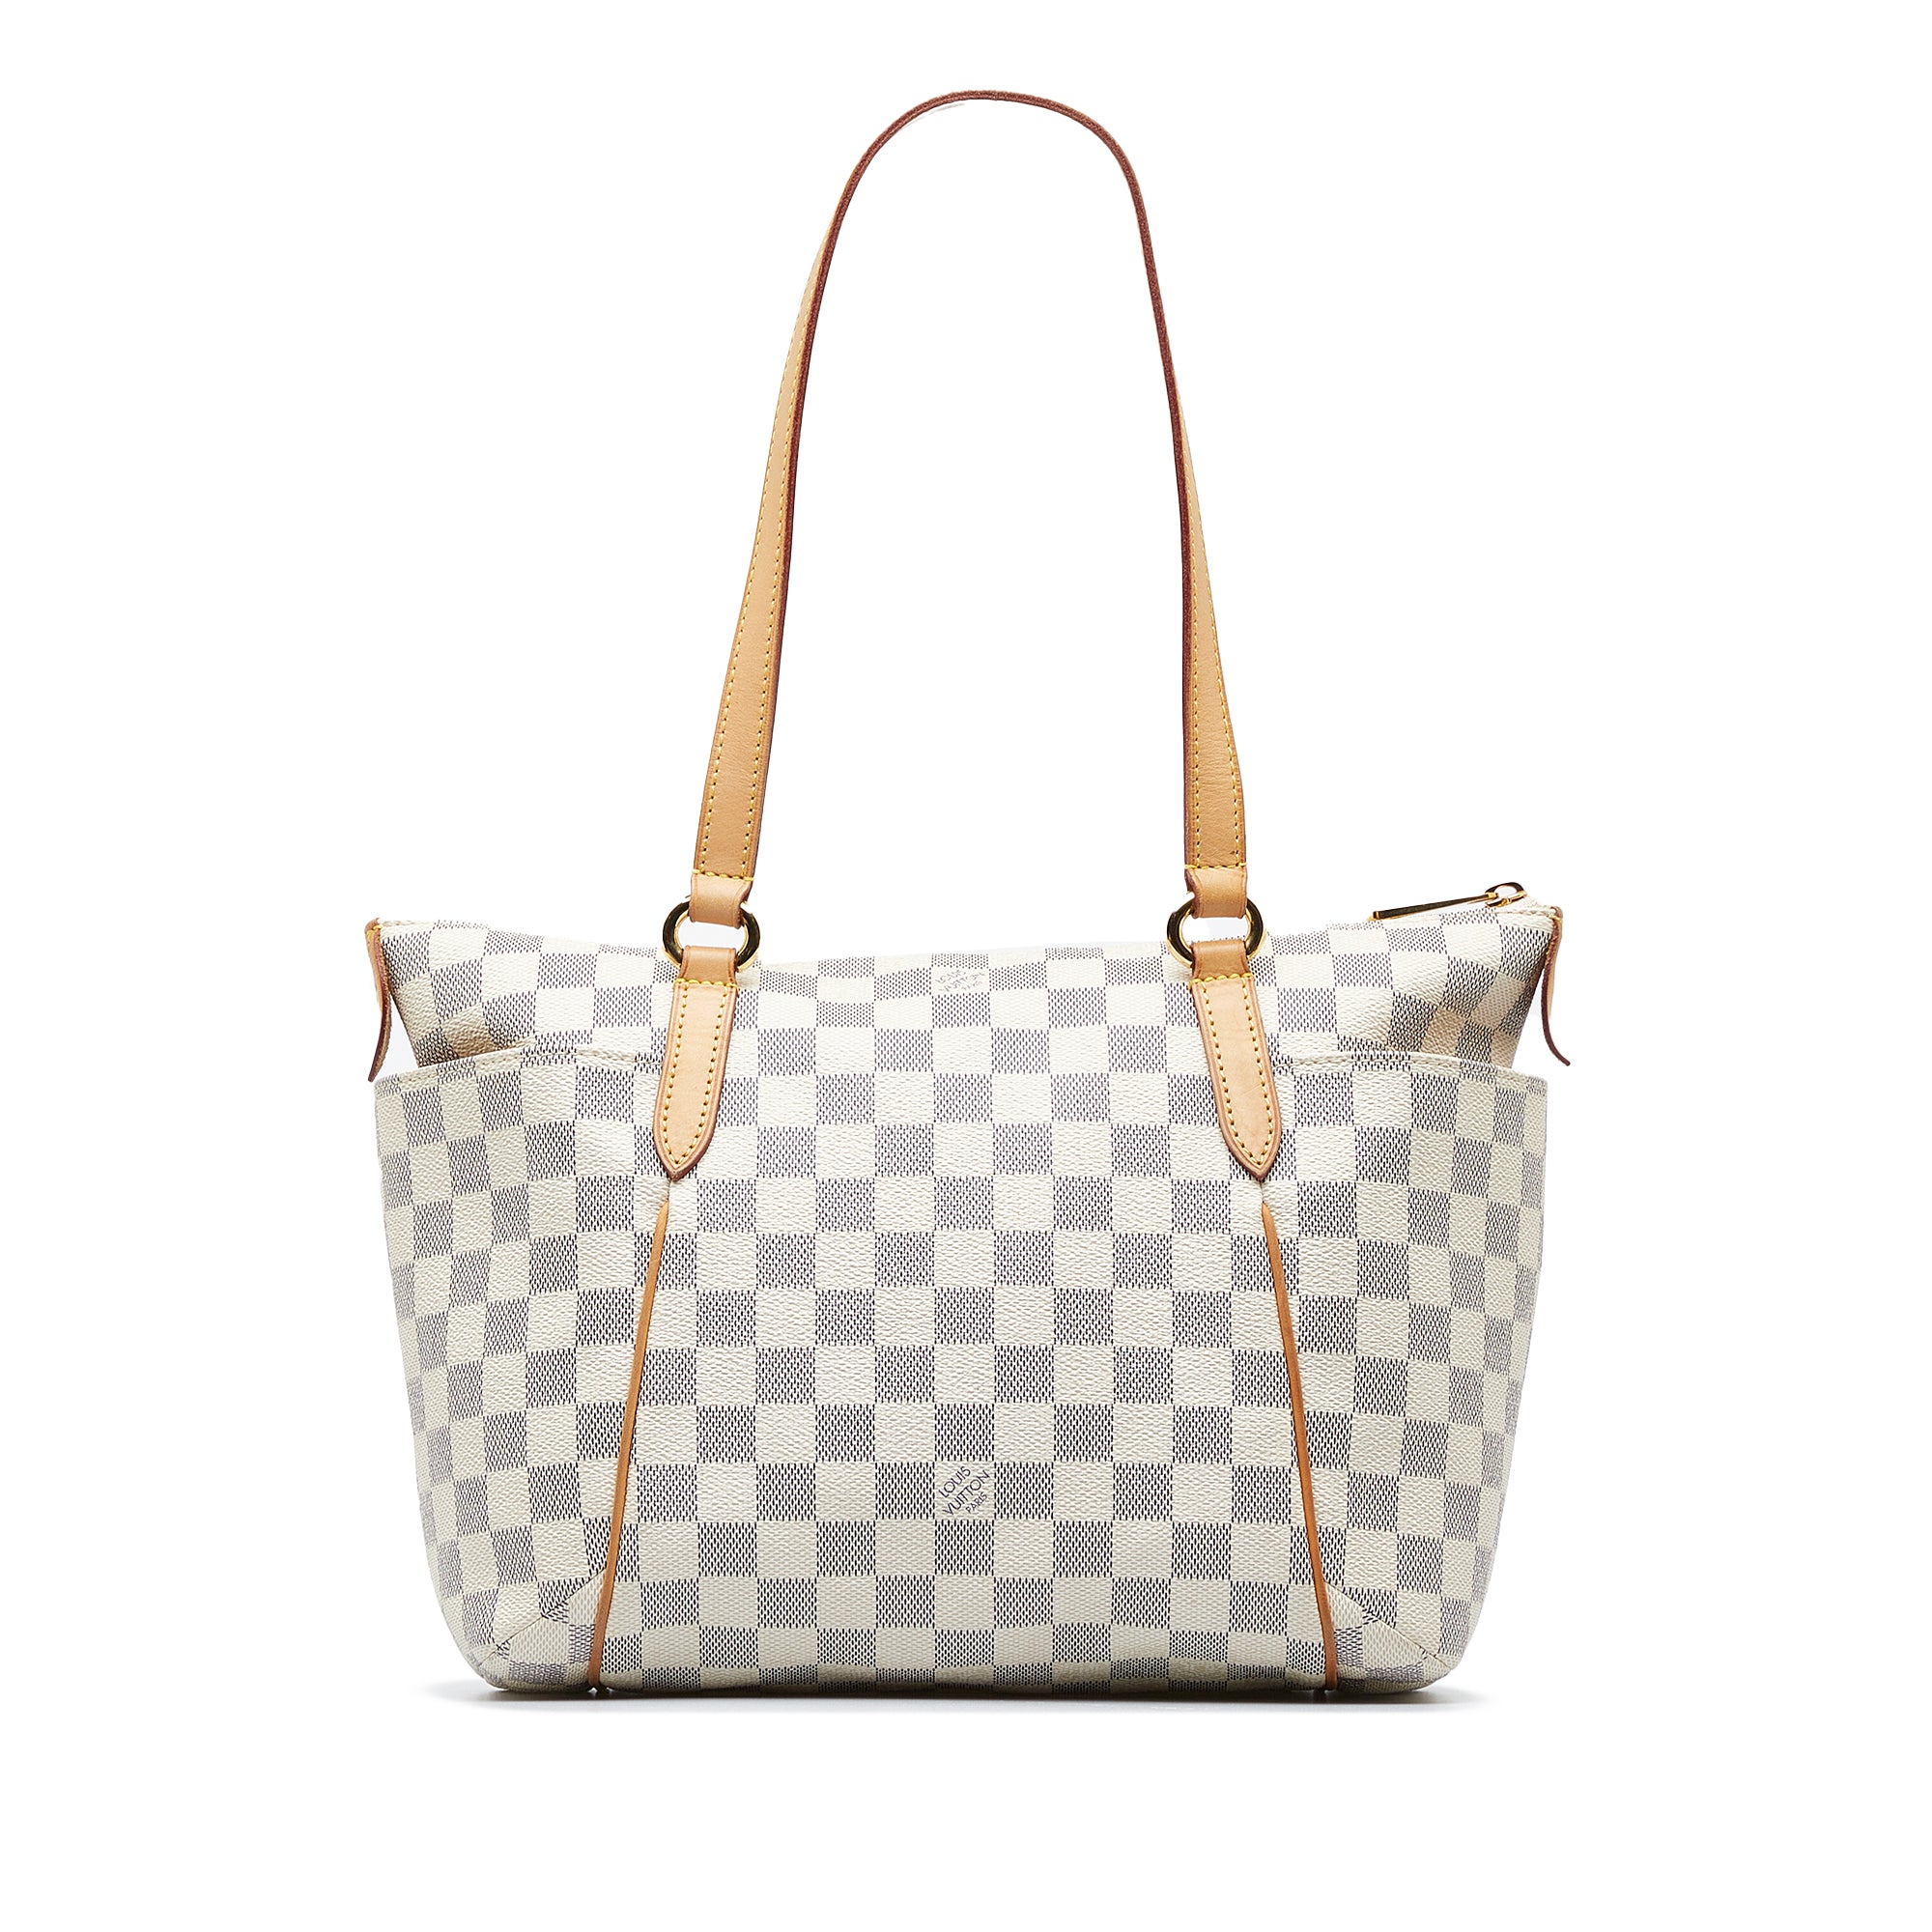 Louis vuitton totally pm compared to totally mm  Louis vuitton bag  neverfull, Louis vuitton totally, Louis vuitton